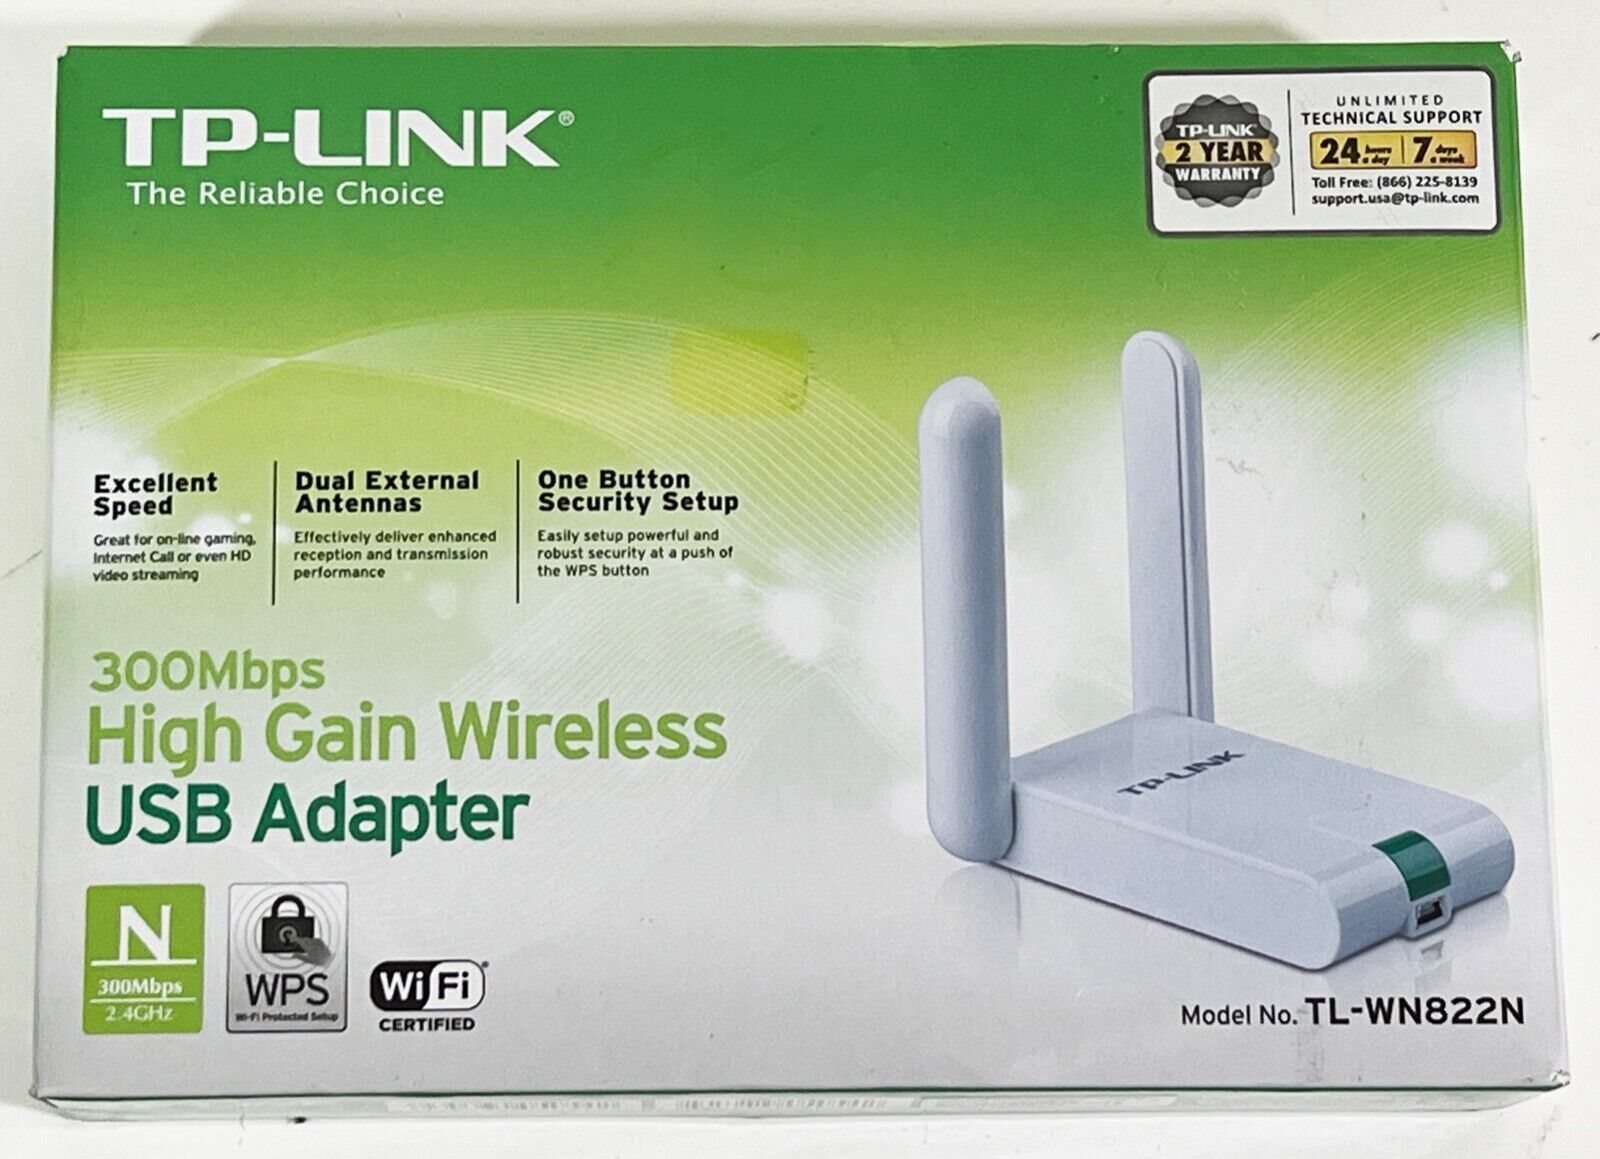 TP-LINK (TL-WN822N) 300 Mbps High Gain Wireless USB Adapter (OPEN BOX NEW) - $19.79